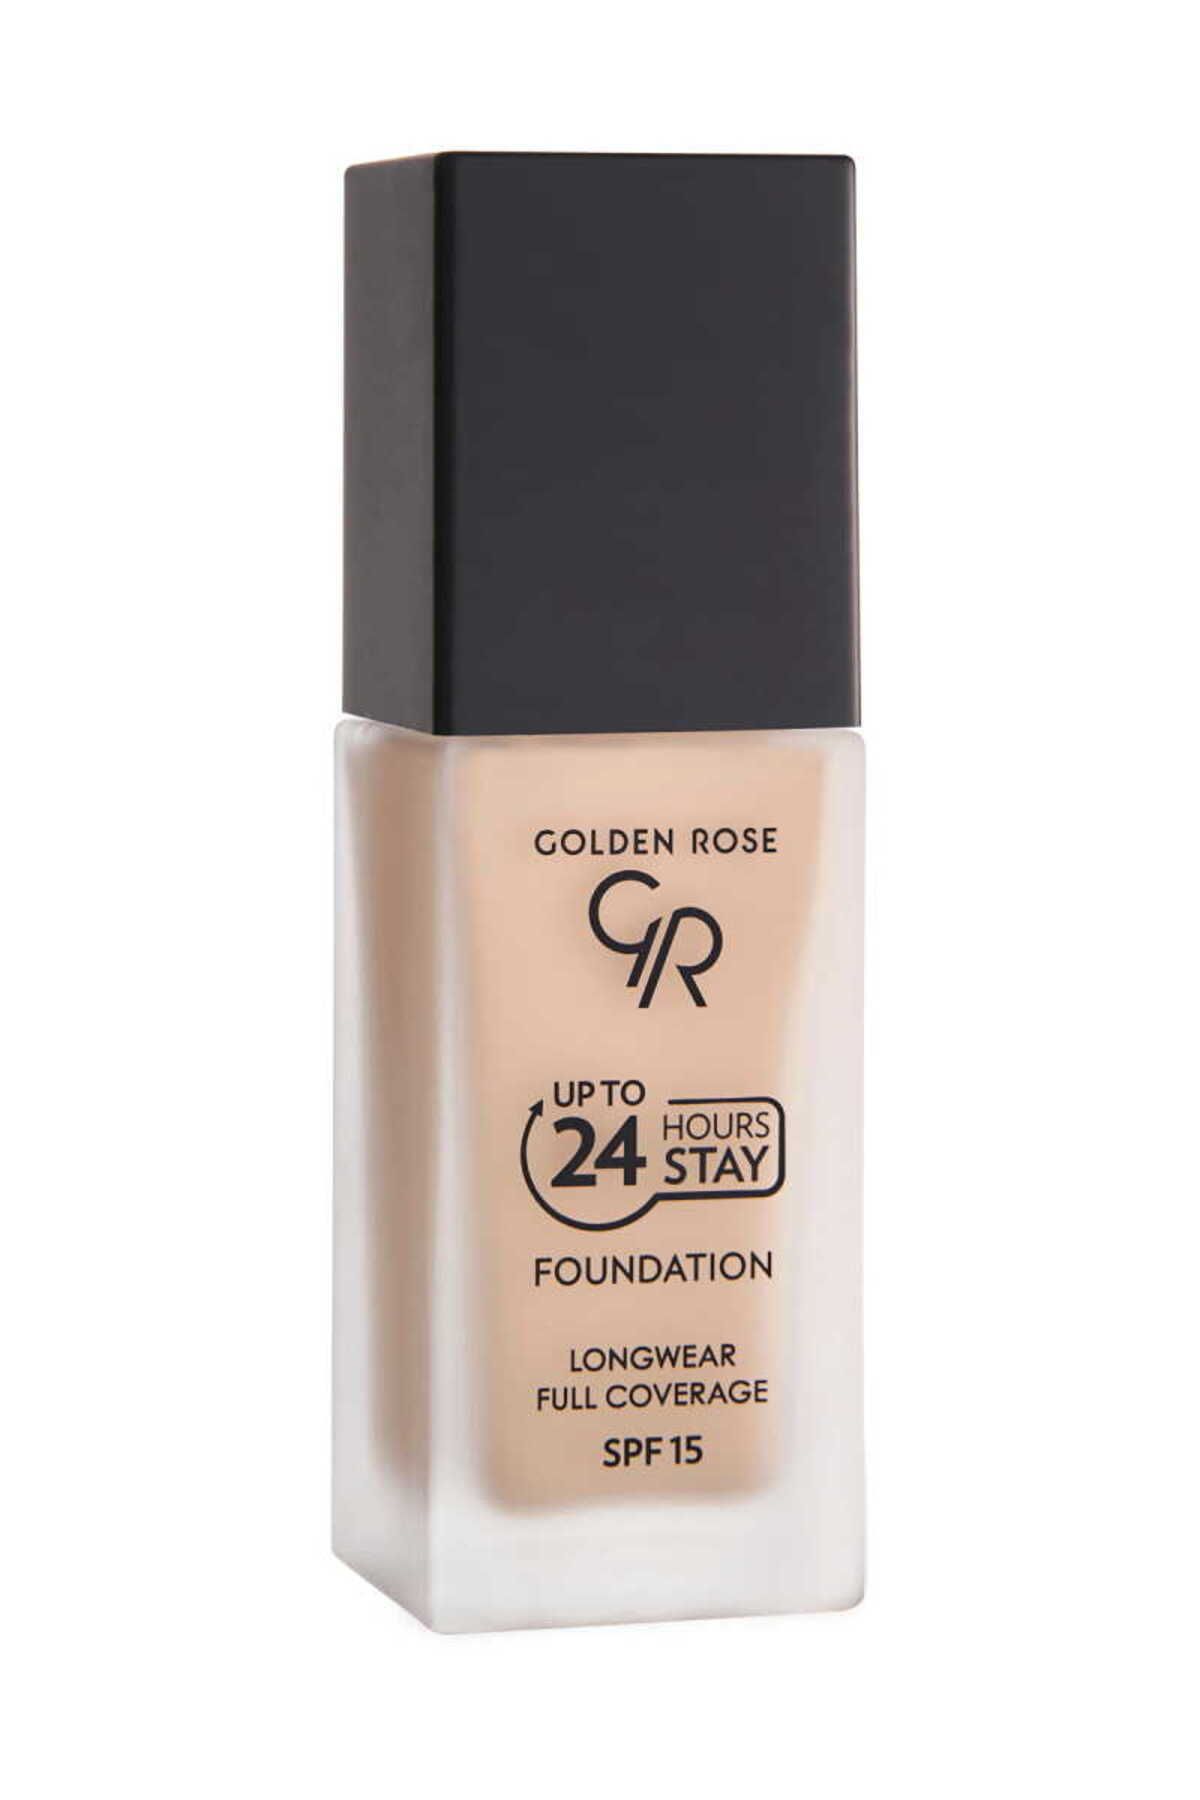 Golden Rose Up To 24 Hours Stay Foundation 04